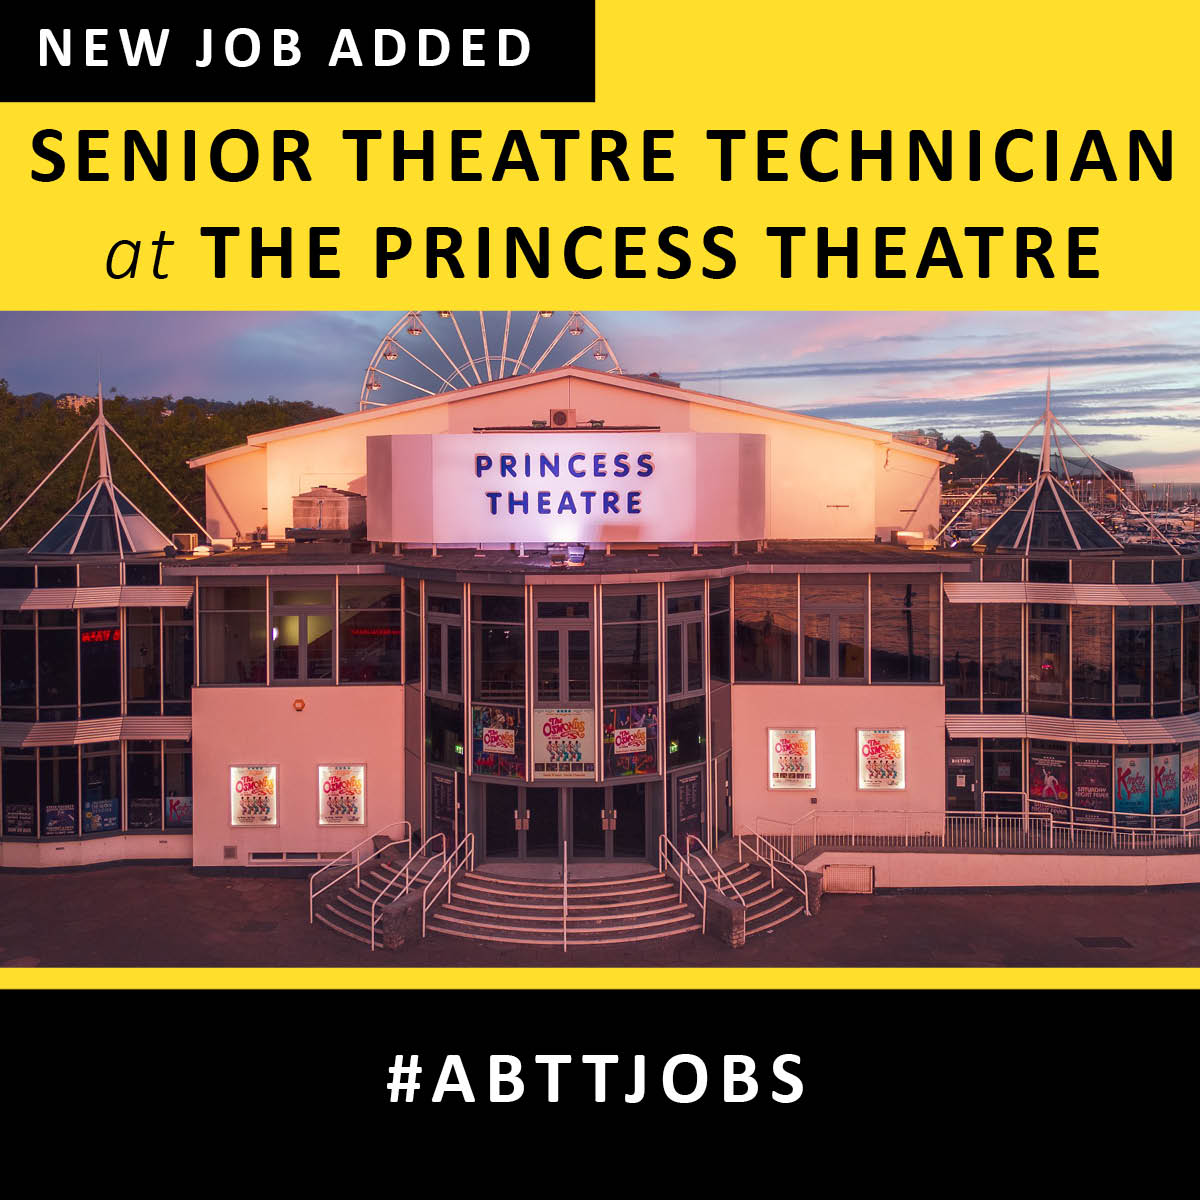 ATG Entertainment is looking for a Senior Theatre Technician to join them at The Princess Theatre is South Devon’s largest regional theatre.

Find out more and apply here: abtt.org.uk/jobs/senior-th…

#ABTTjobs #TheatreJobs #Theatre #BackstageJobs